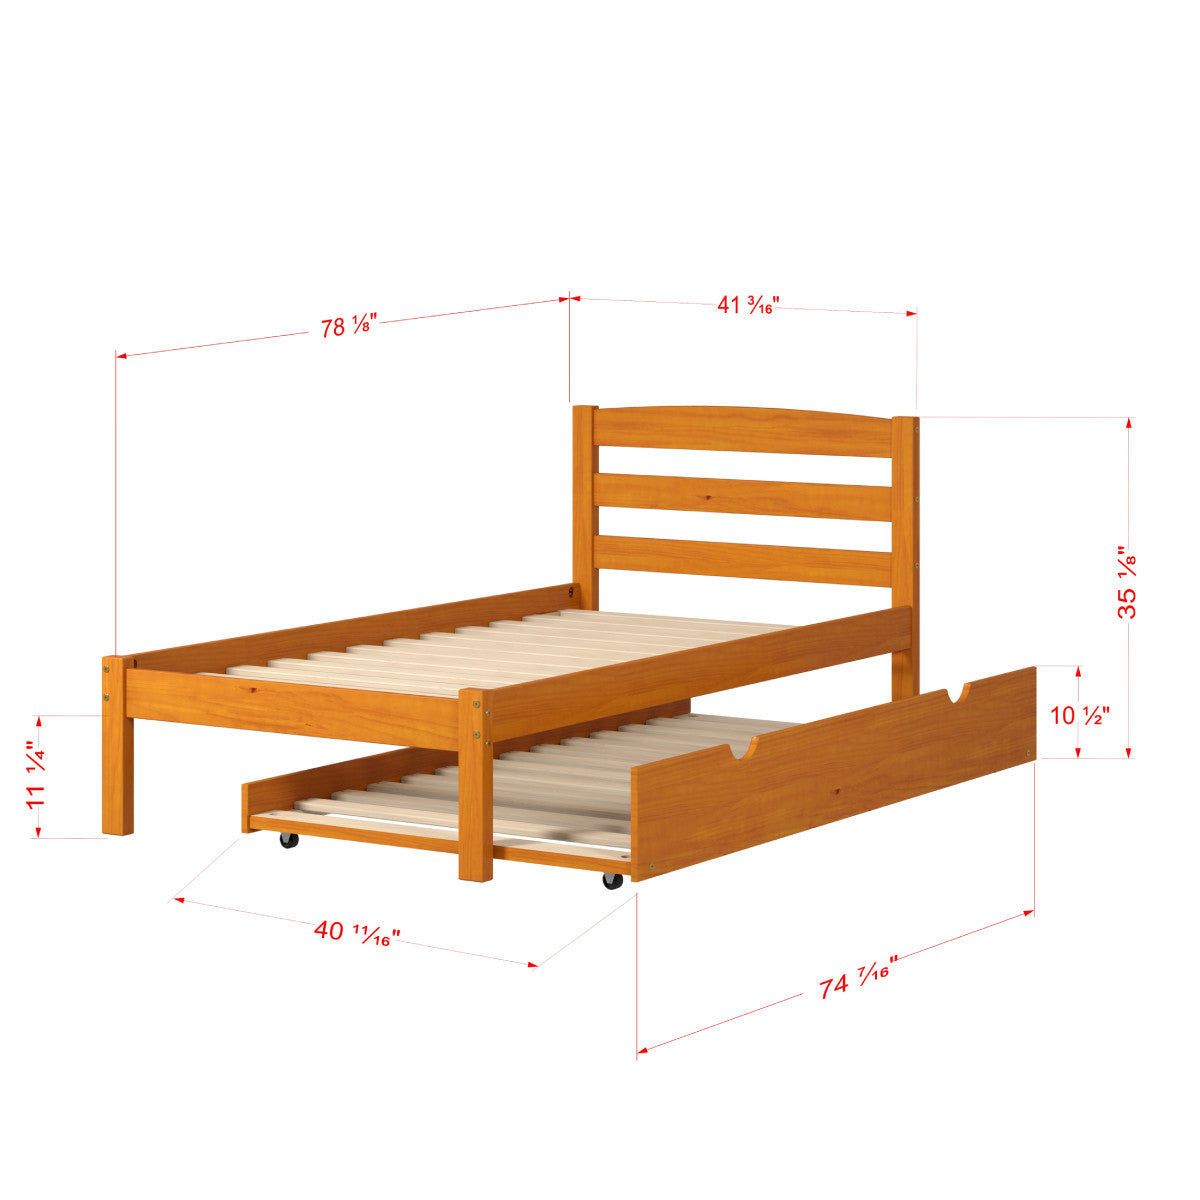 TWIN ECONO BED WITH TRUNDLE BED HONEY FINISH